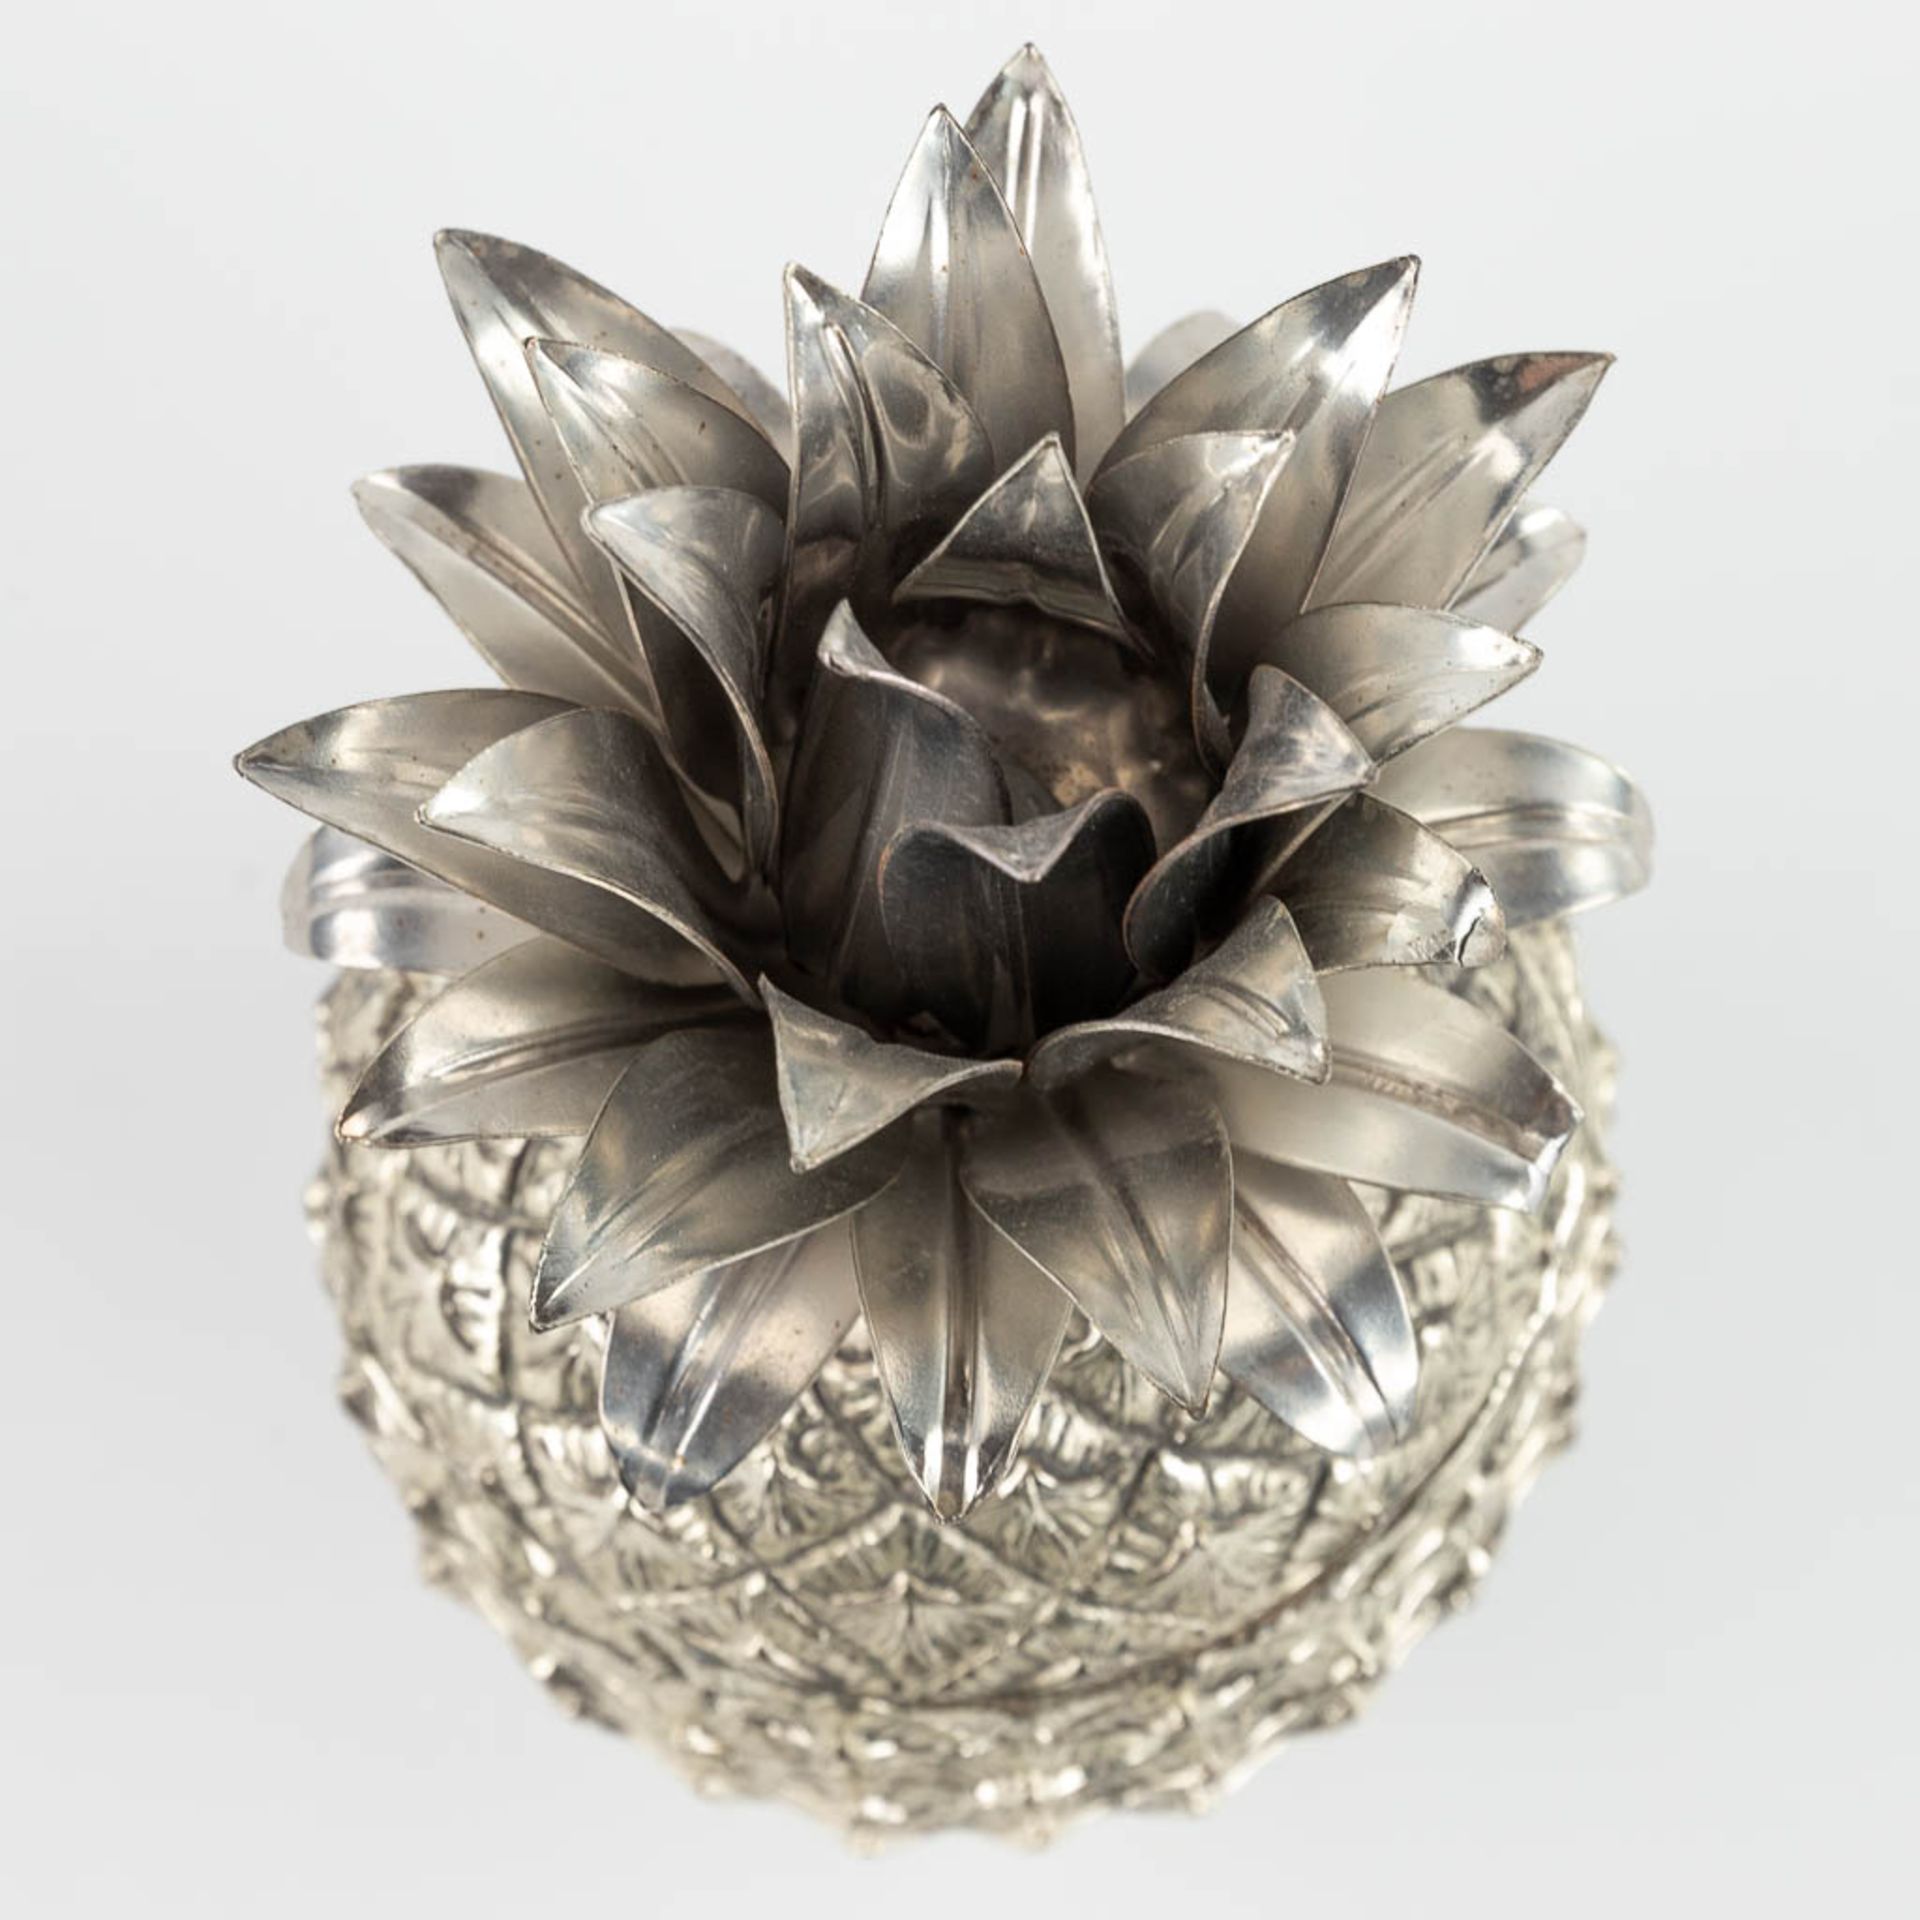 Mauro MANETTI (1946) 'Pineapple' an ice pail. (H:26 x D:14 cm) - Image 4 of 13